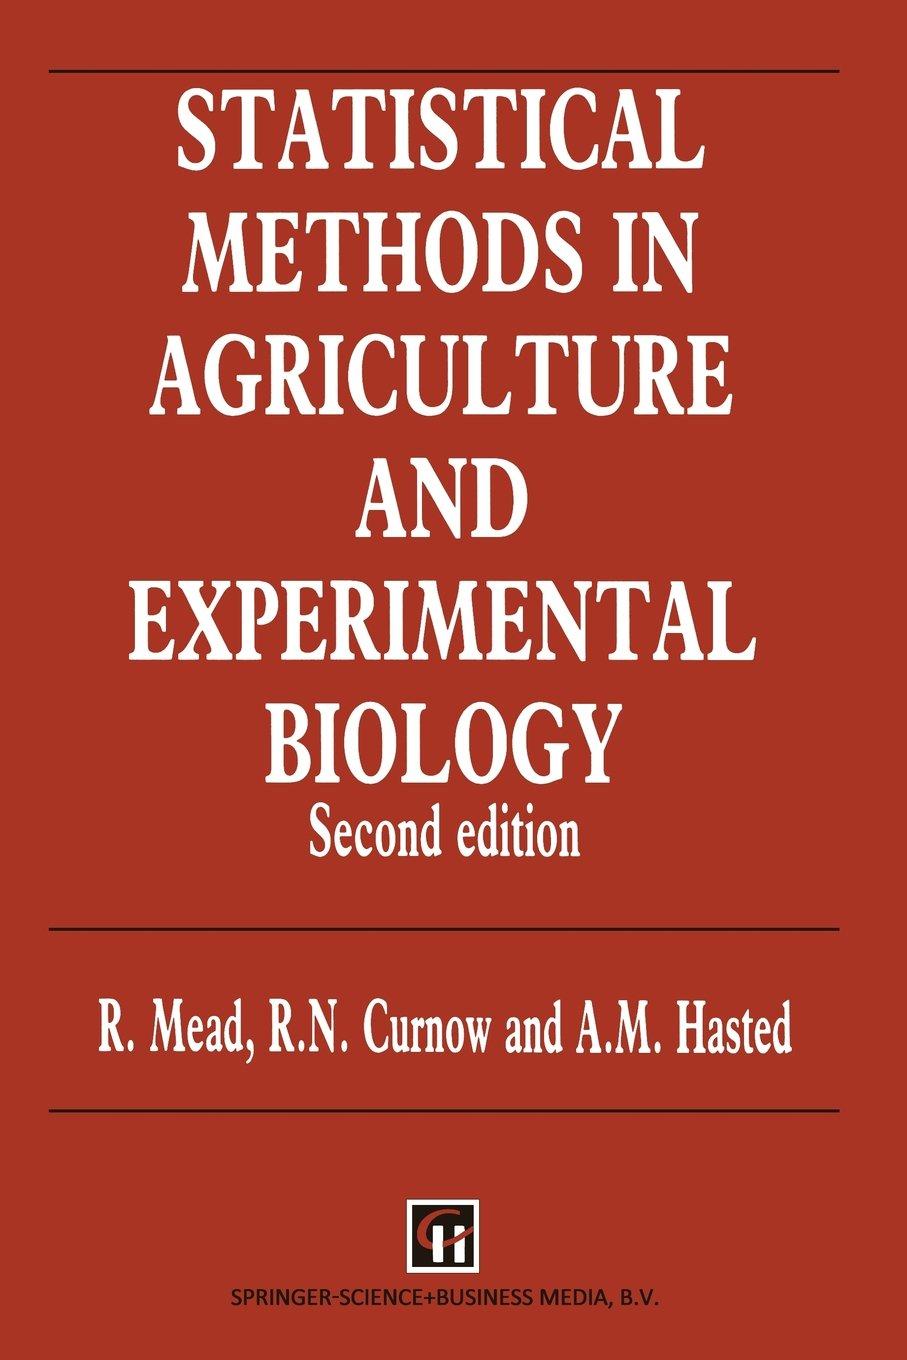 statistical methods in agriculture and experimental biology 2nd edition roger mead, robert n. curnow, anne m.